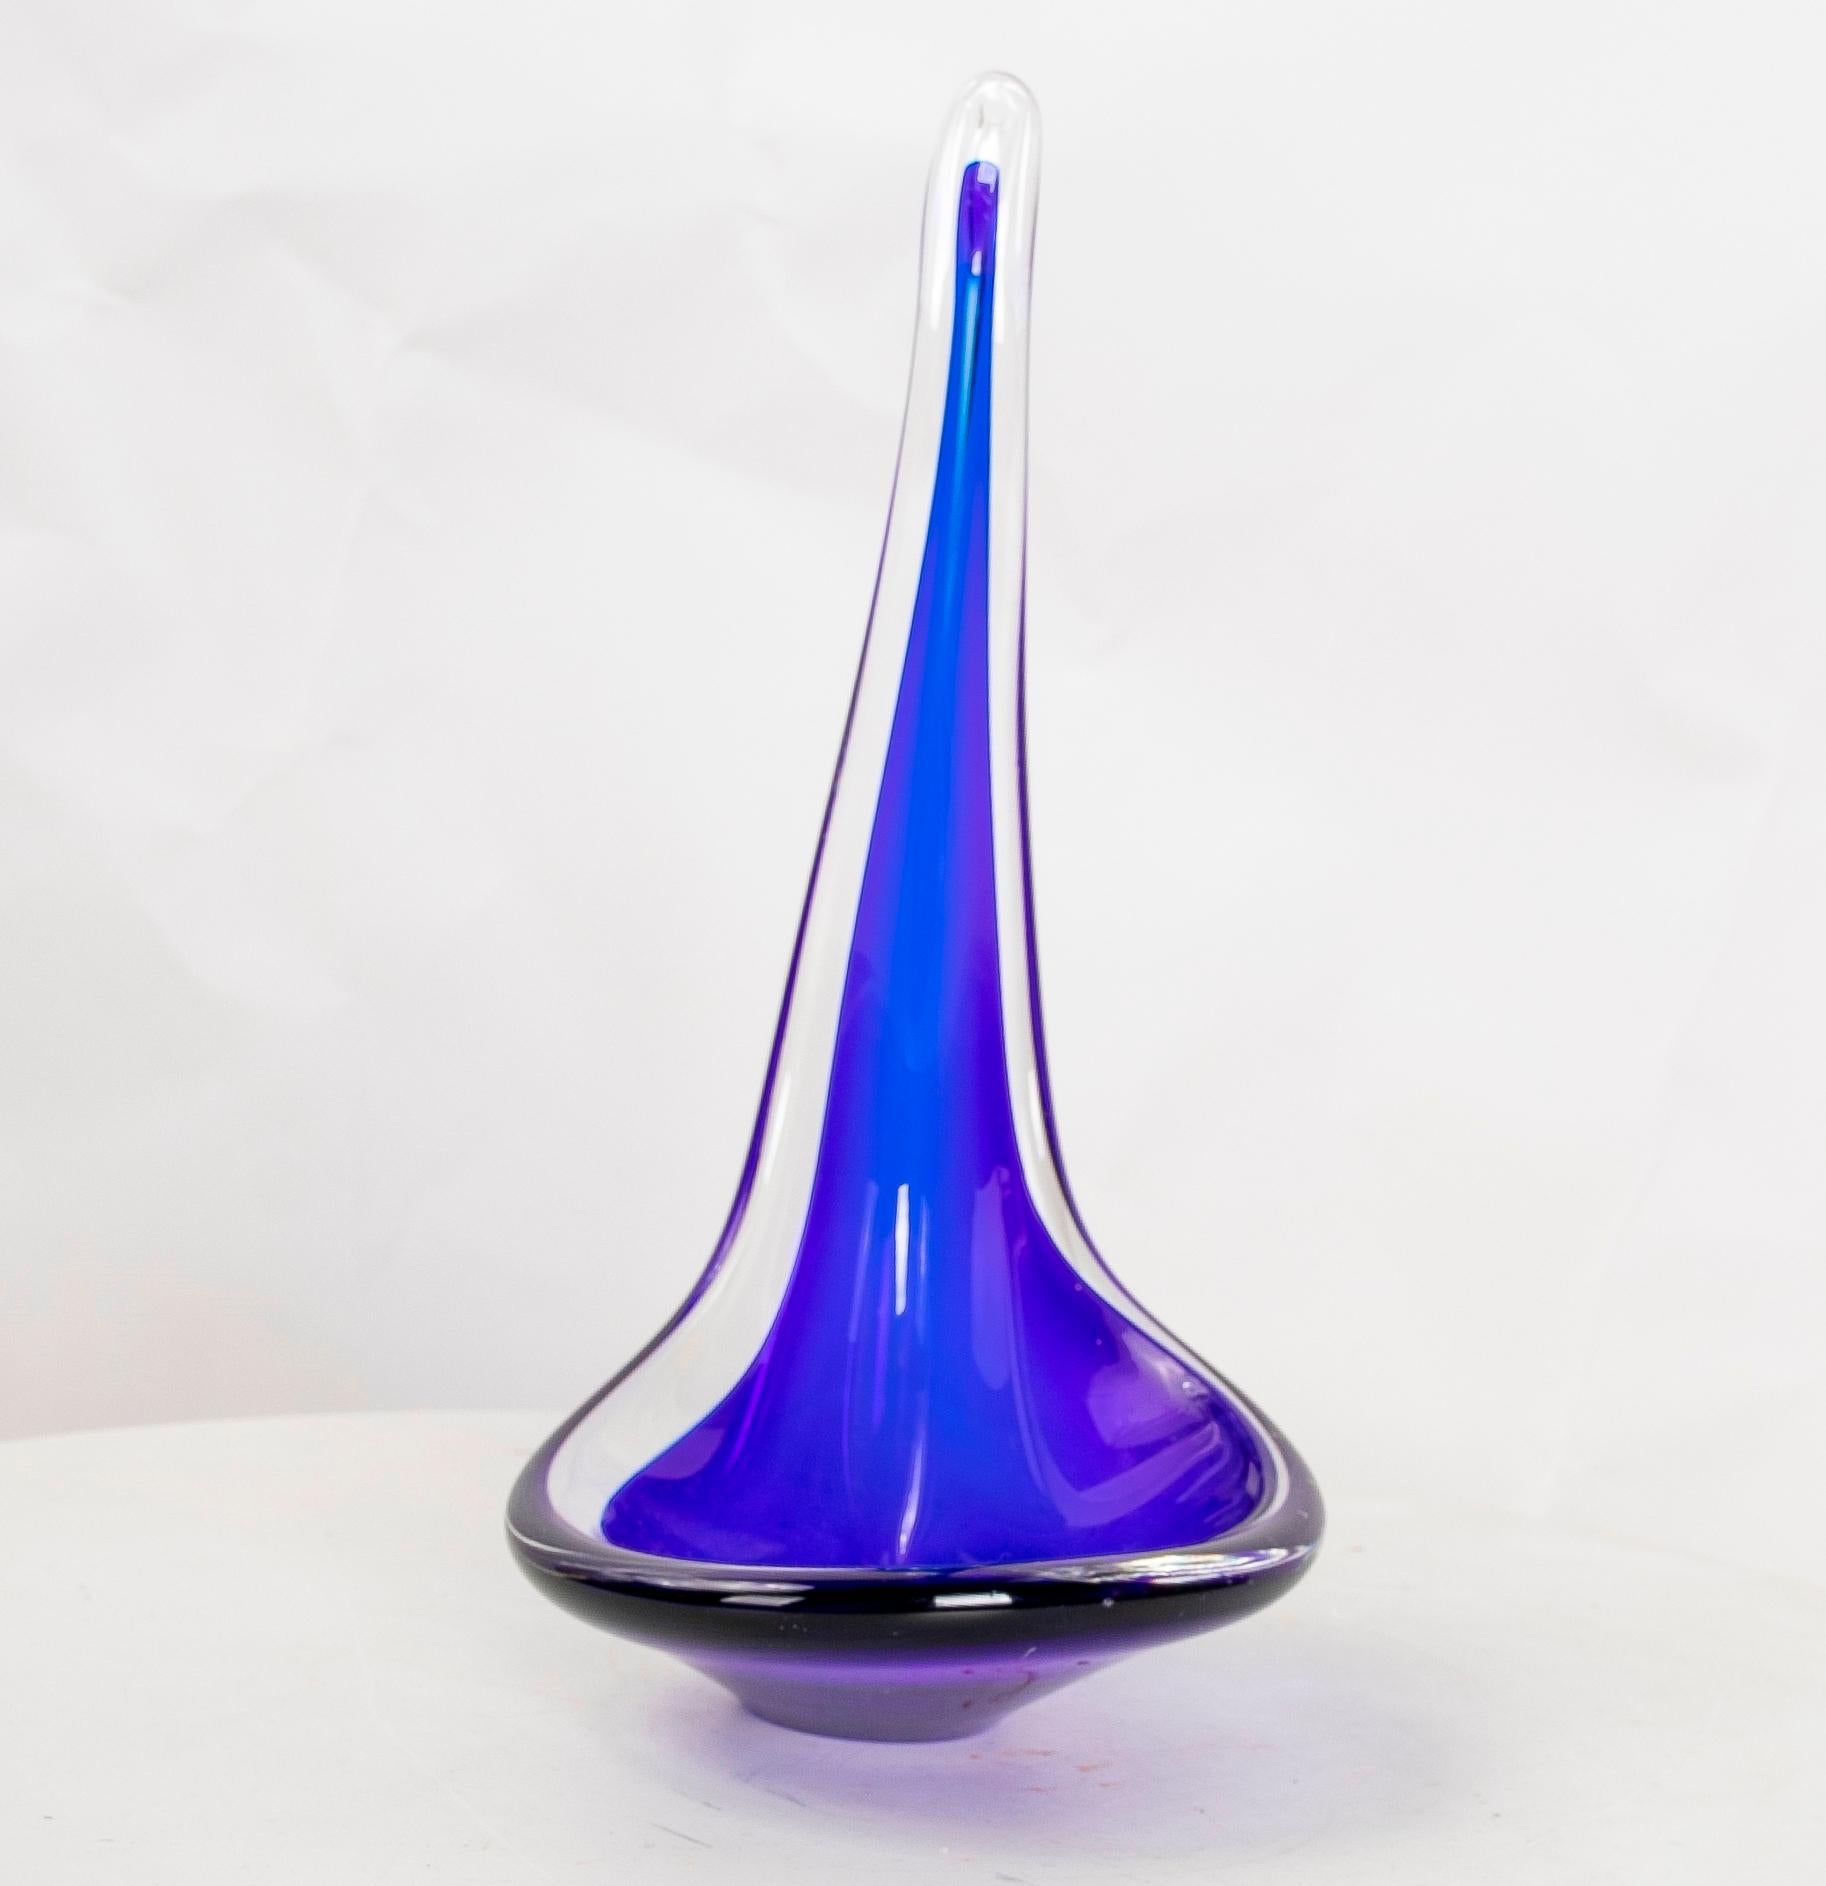 1980s Murano glass sculpture for table in shades of blue.
 